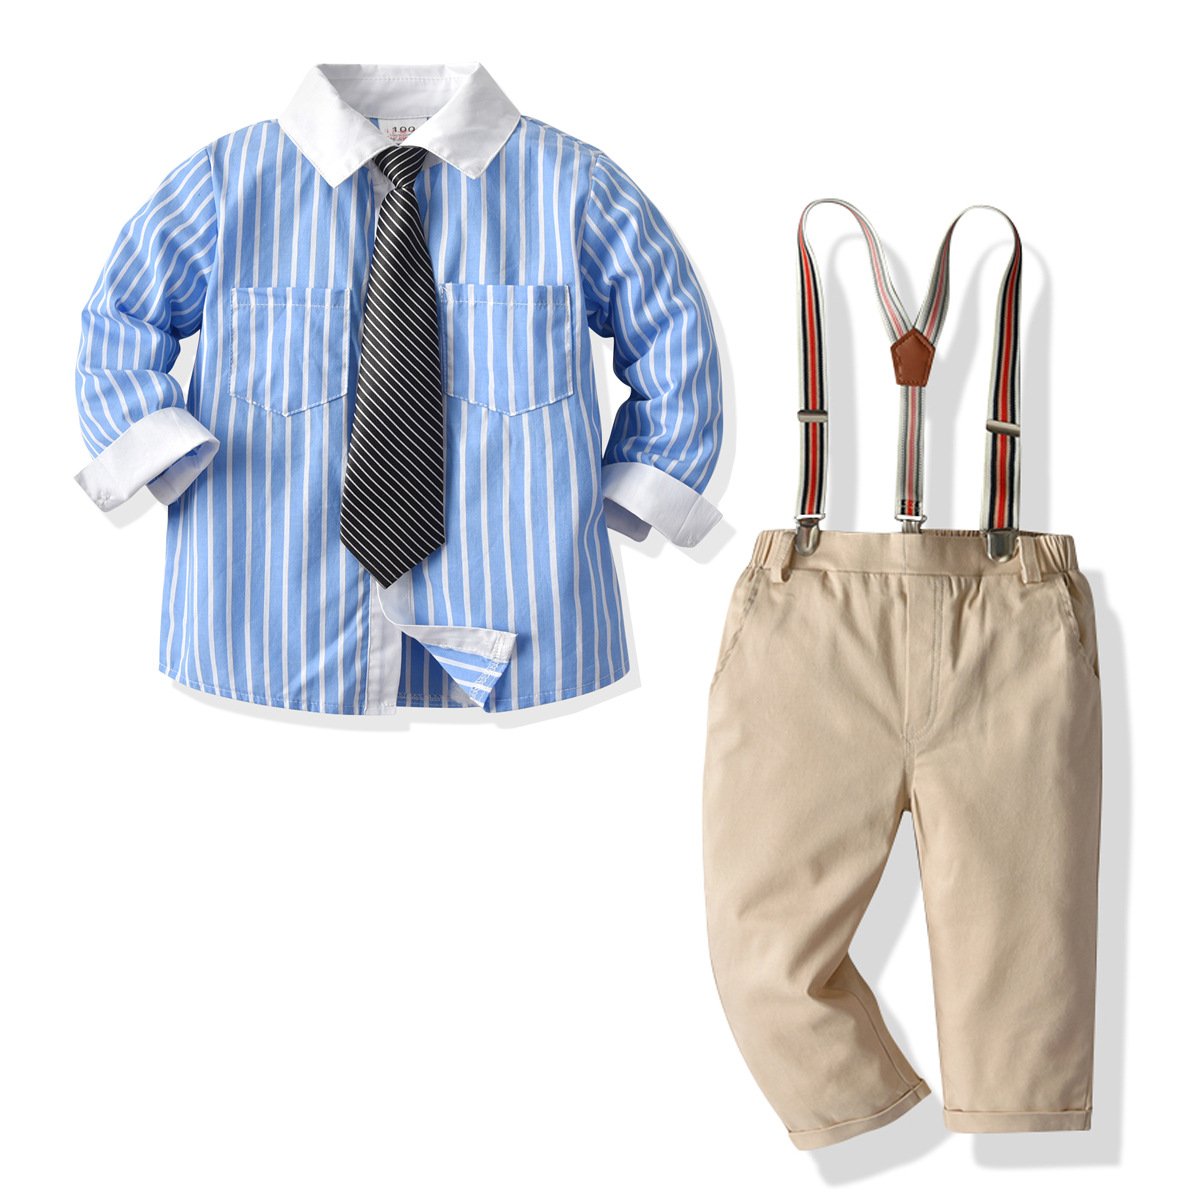 2 Pieces Kid Boy Outfit Bow Tie Stripe Shirt & Overall Pants Wholesale 69356795